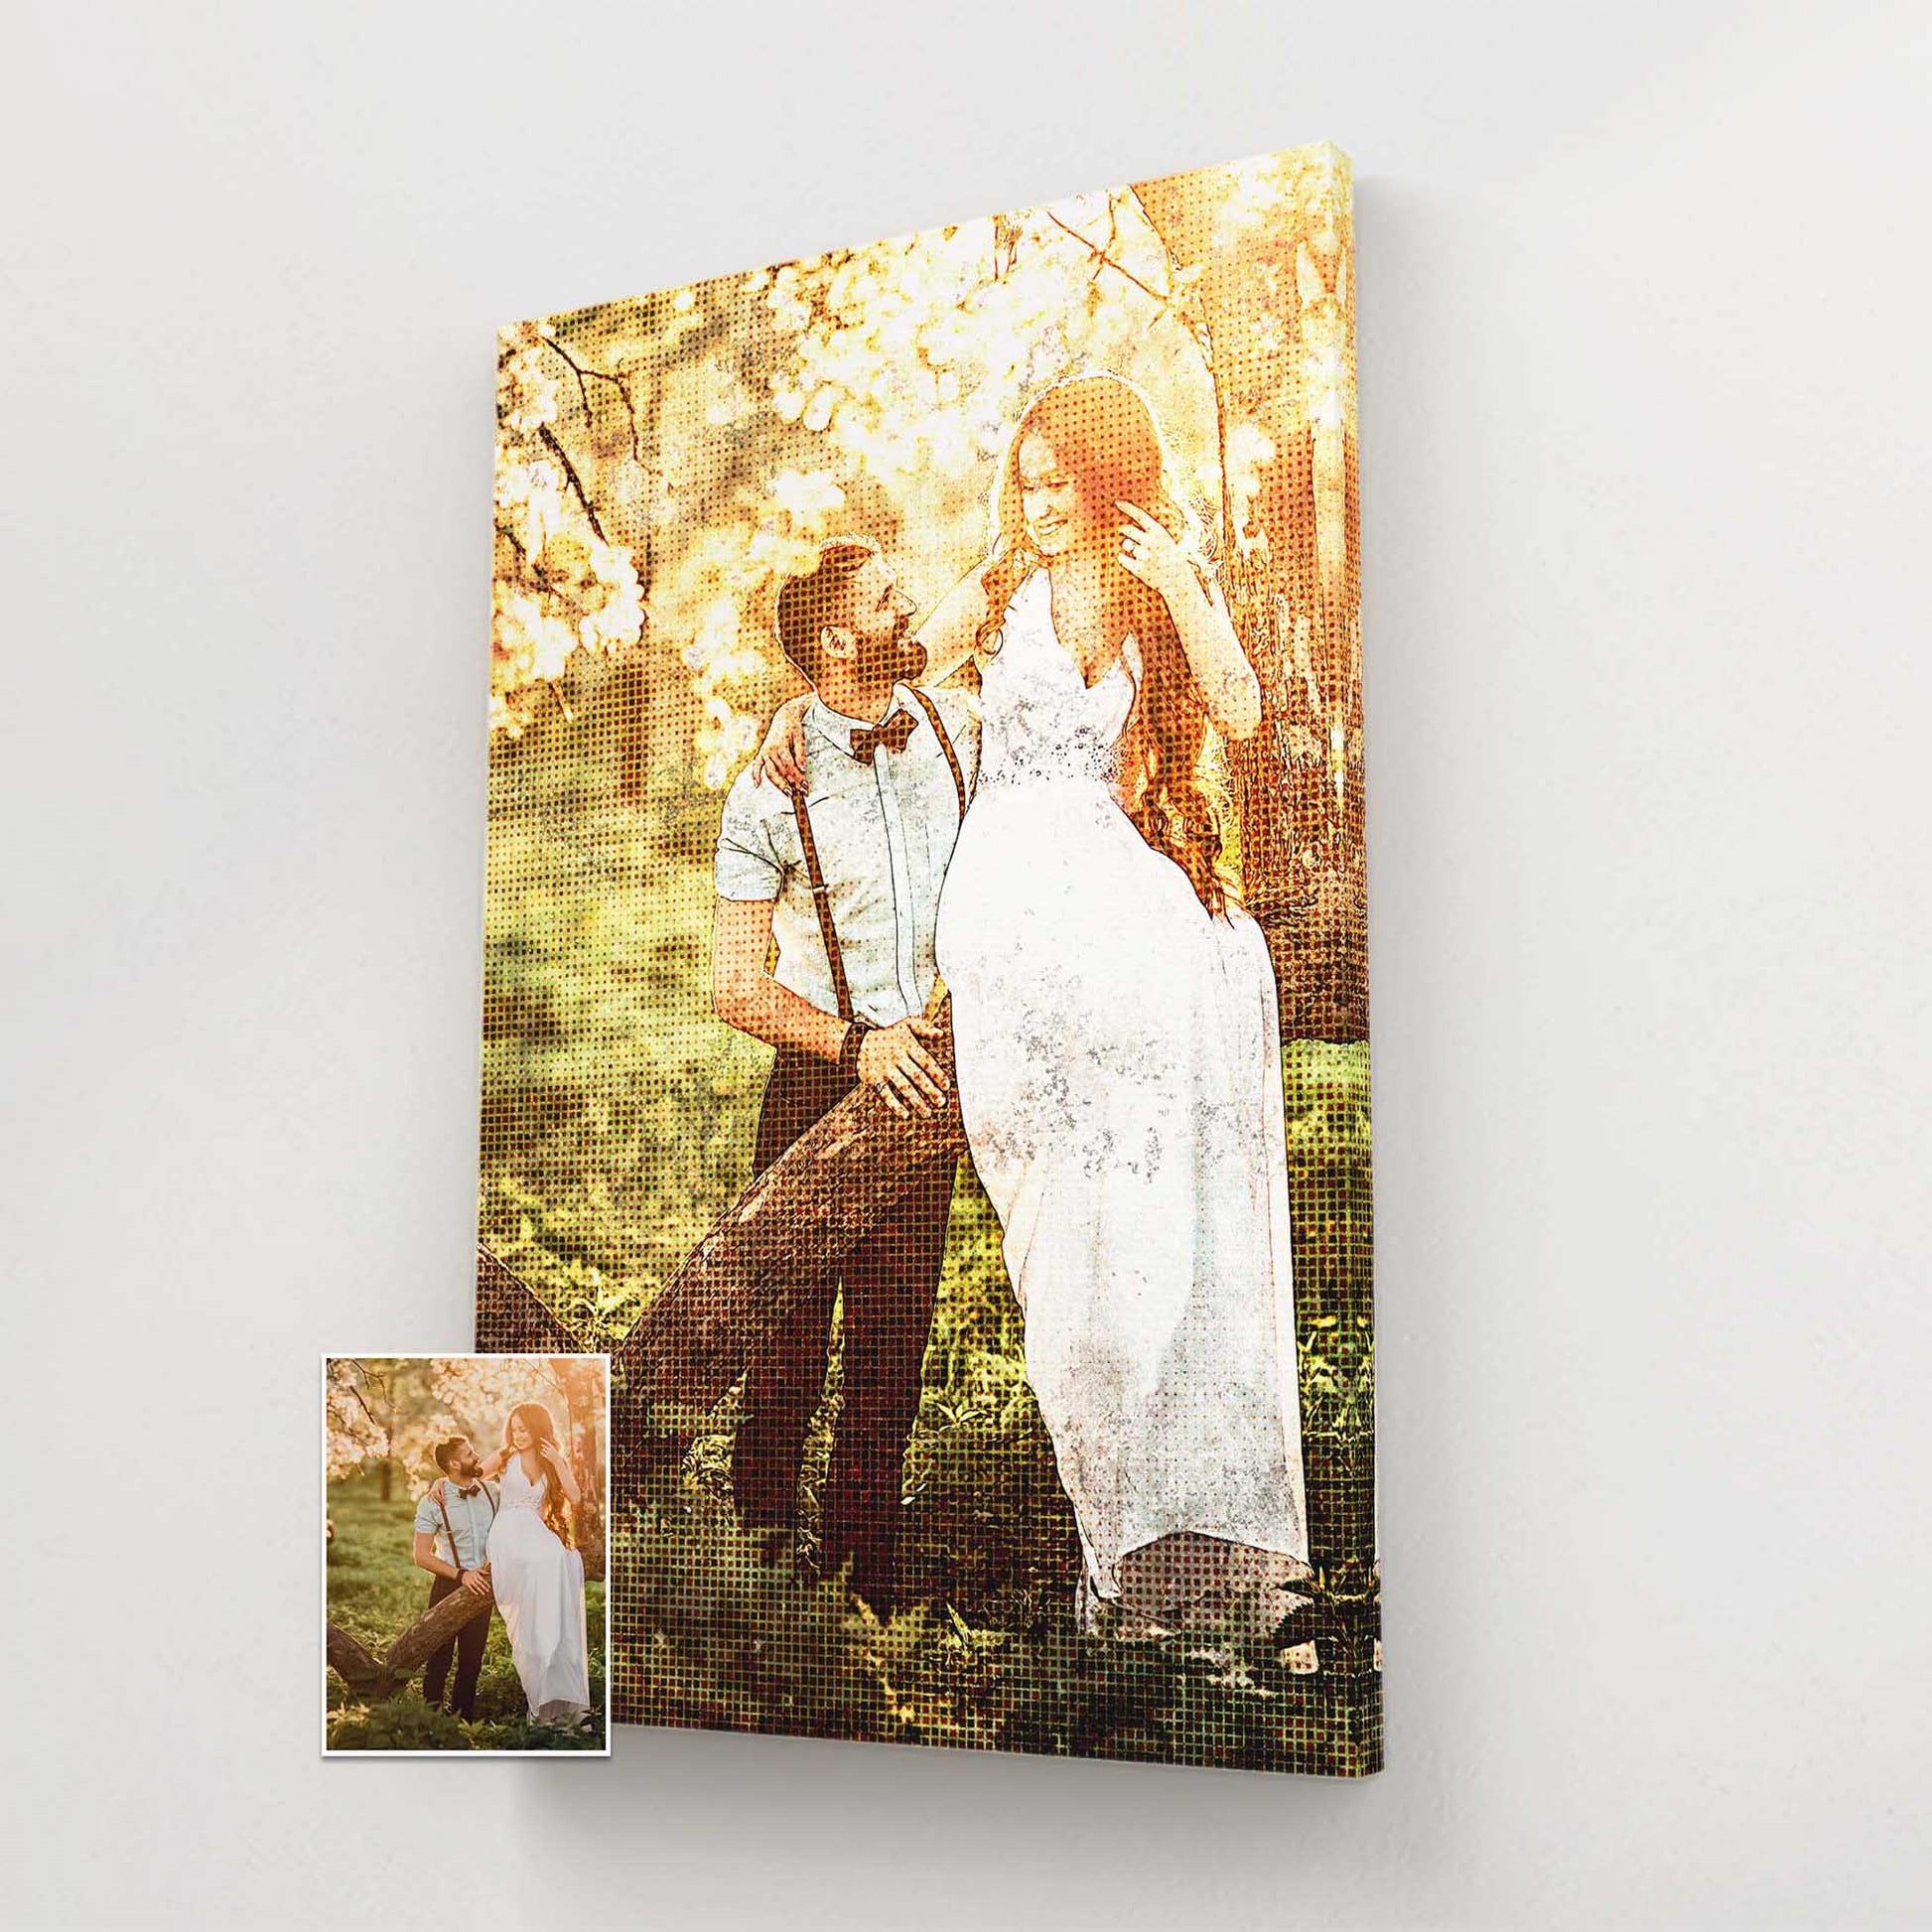 Create a nostalgic atmosphere with our Personalised Retro Grunge FX Canvas. Its cool and trendy 90s vibe, combined with a unique print from your photo, adds a novelty factor to your home decor